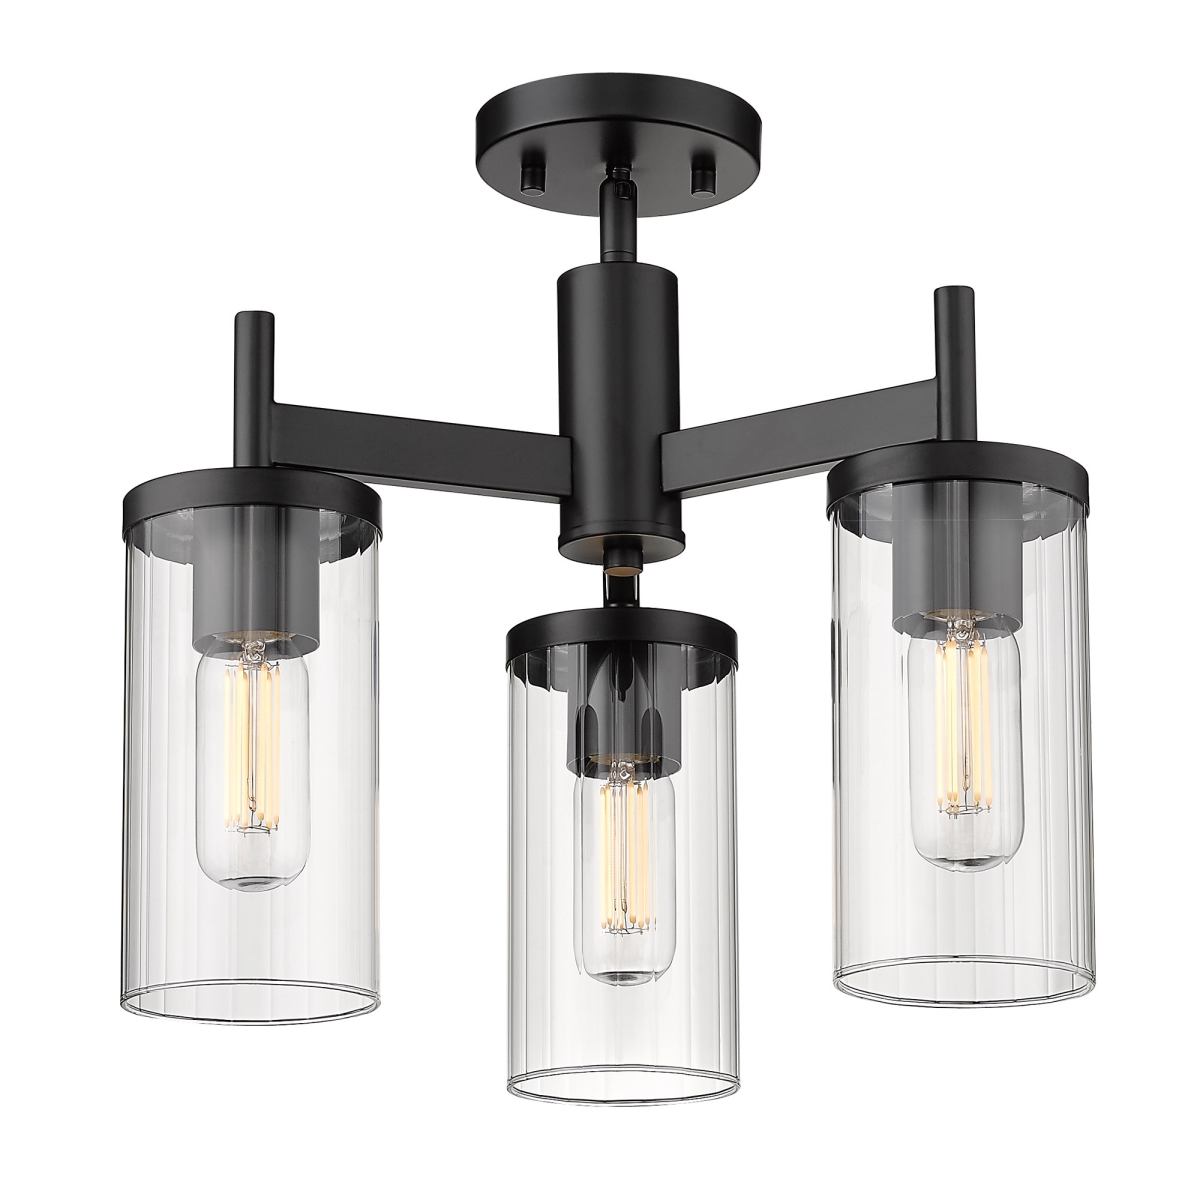 7011-3sf Blk-clr Winslett 3 Light In Black With Ribbed Clear Glass Shade